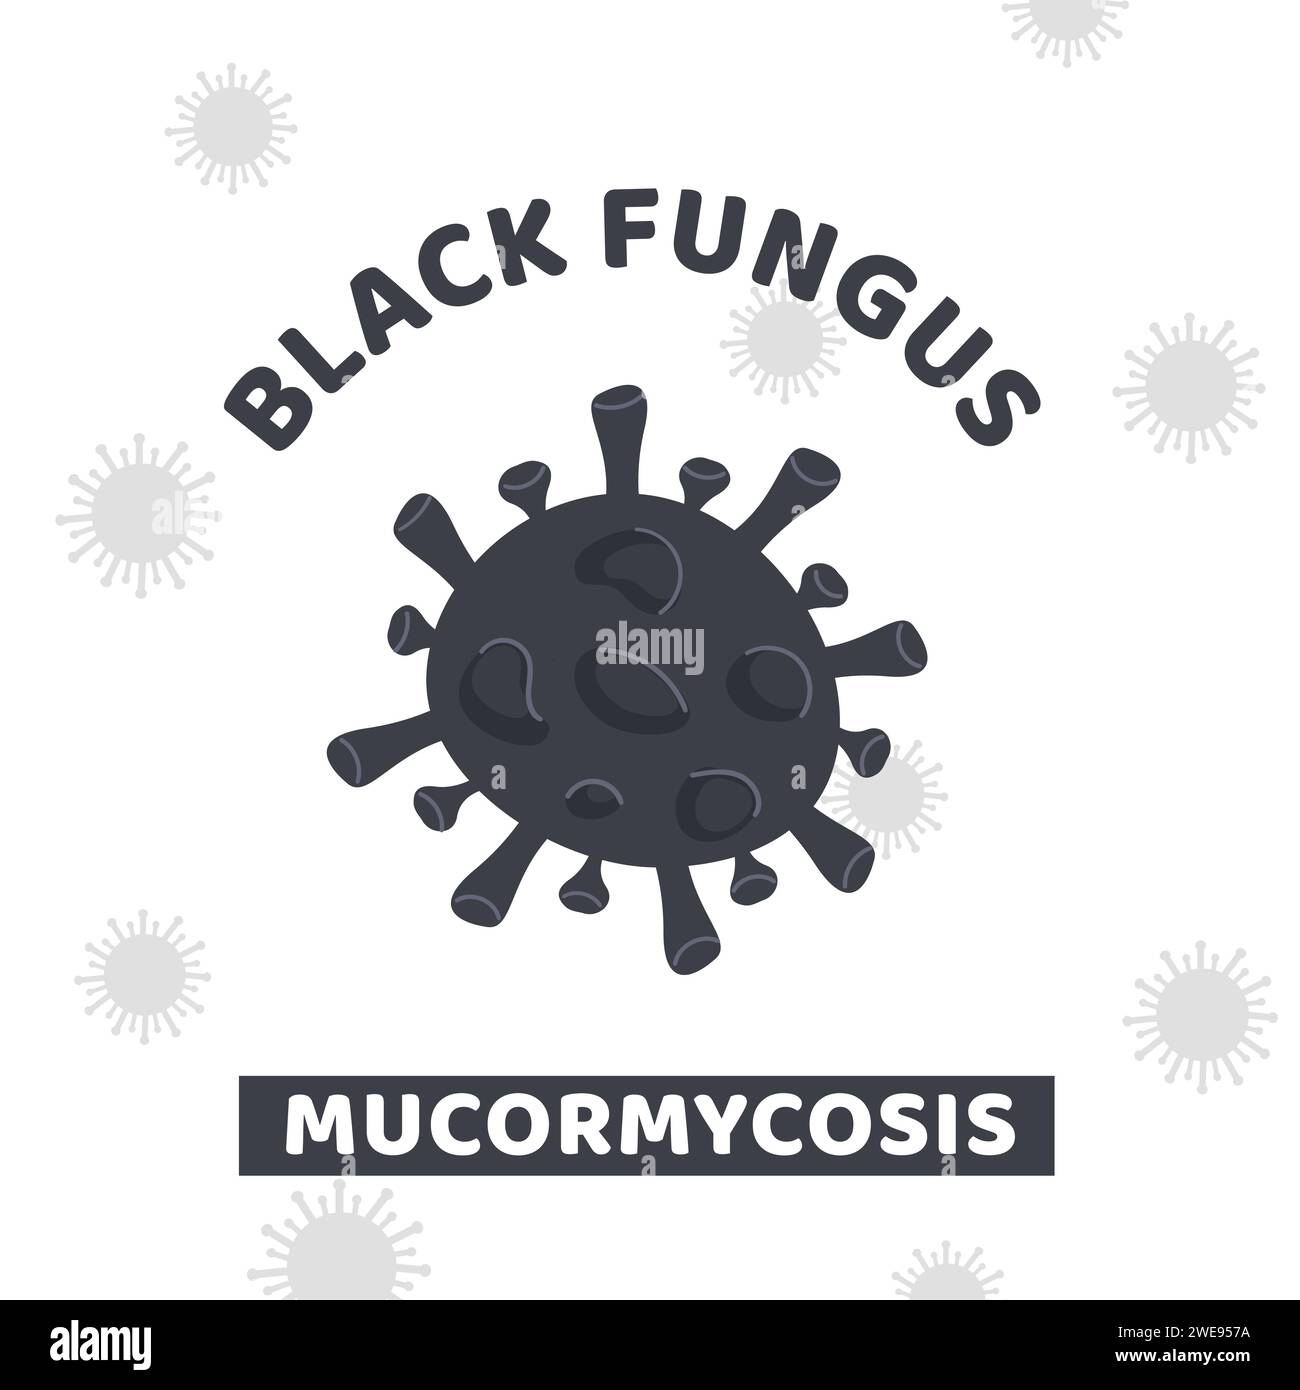 Black Fungus Outbreak in India. Mucormycosis disease. Square banner with Black Mold Bacteria on white background. Toxic mould stain in microscope Stock Vector